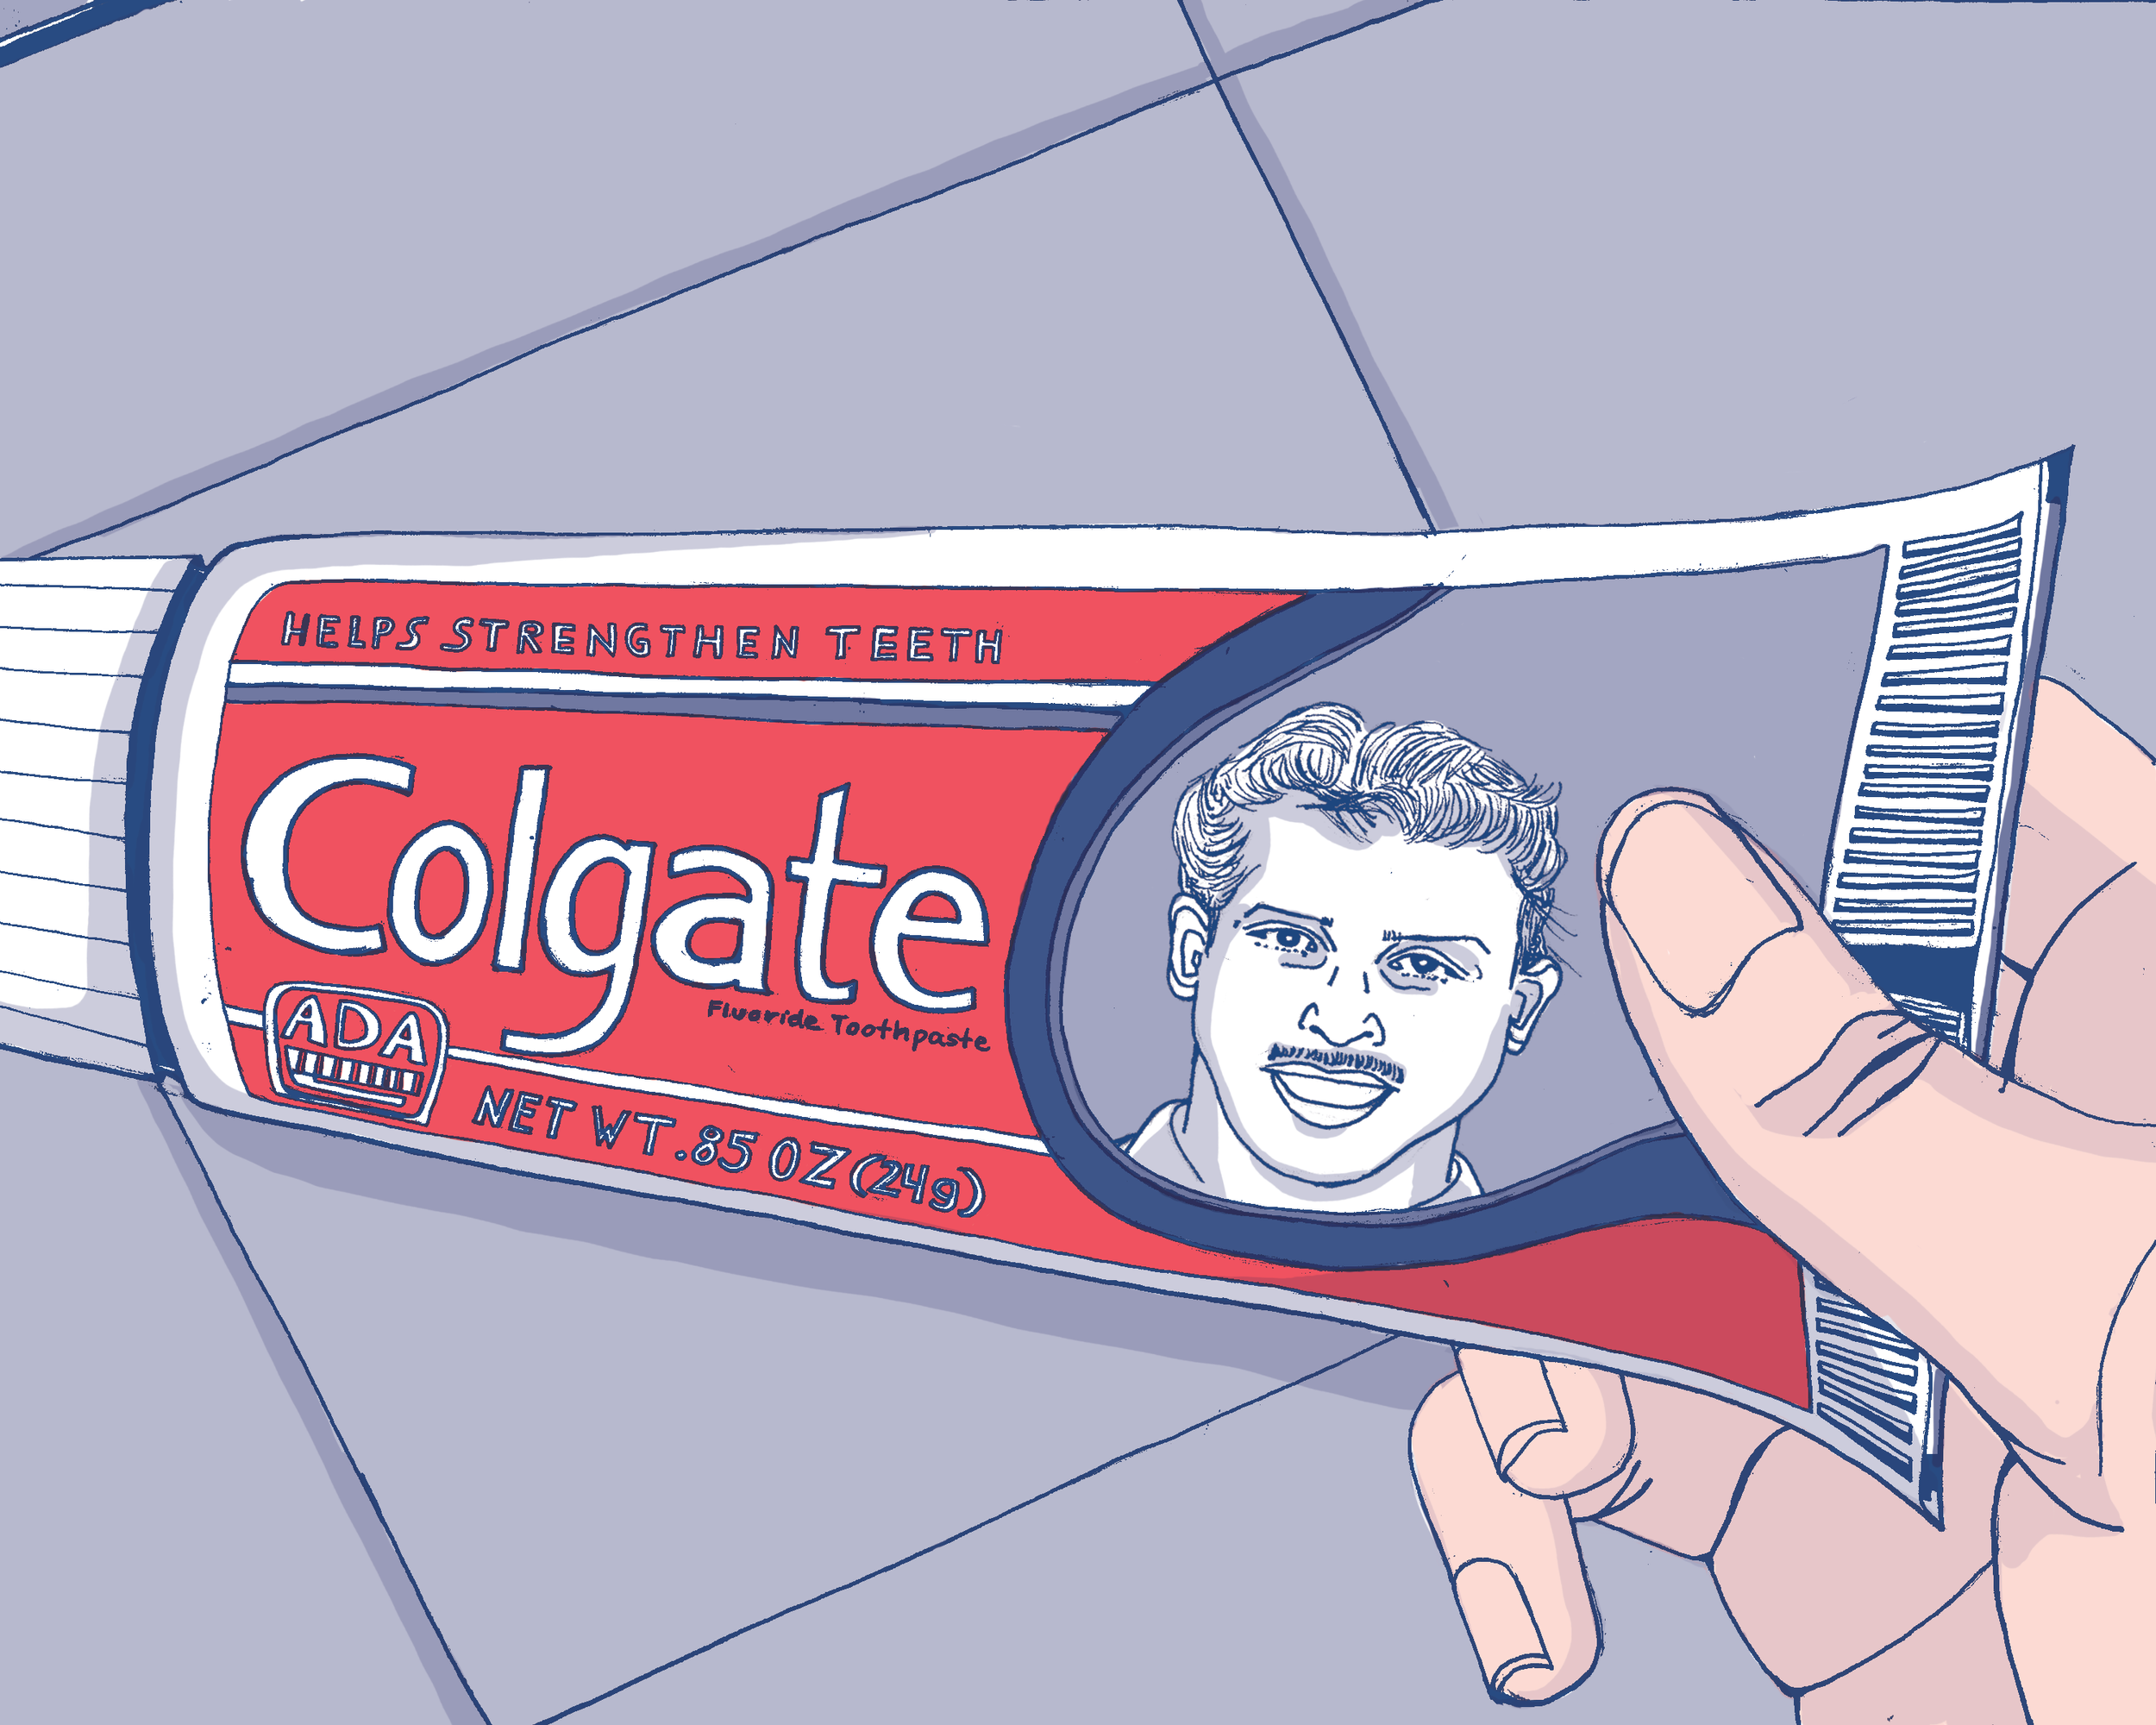 Aajoba-Toothpaste-page-10-&-11-risograph.png